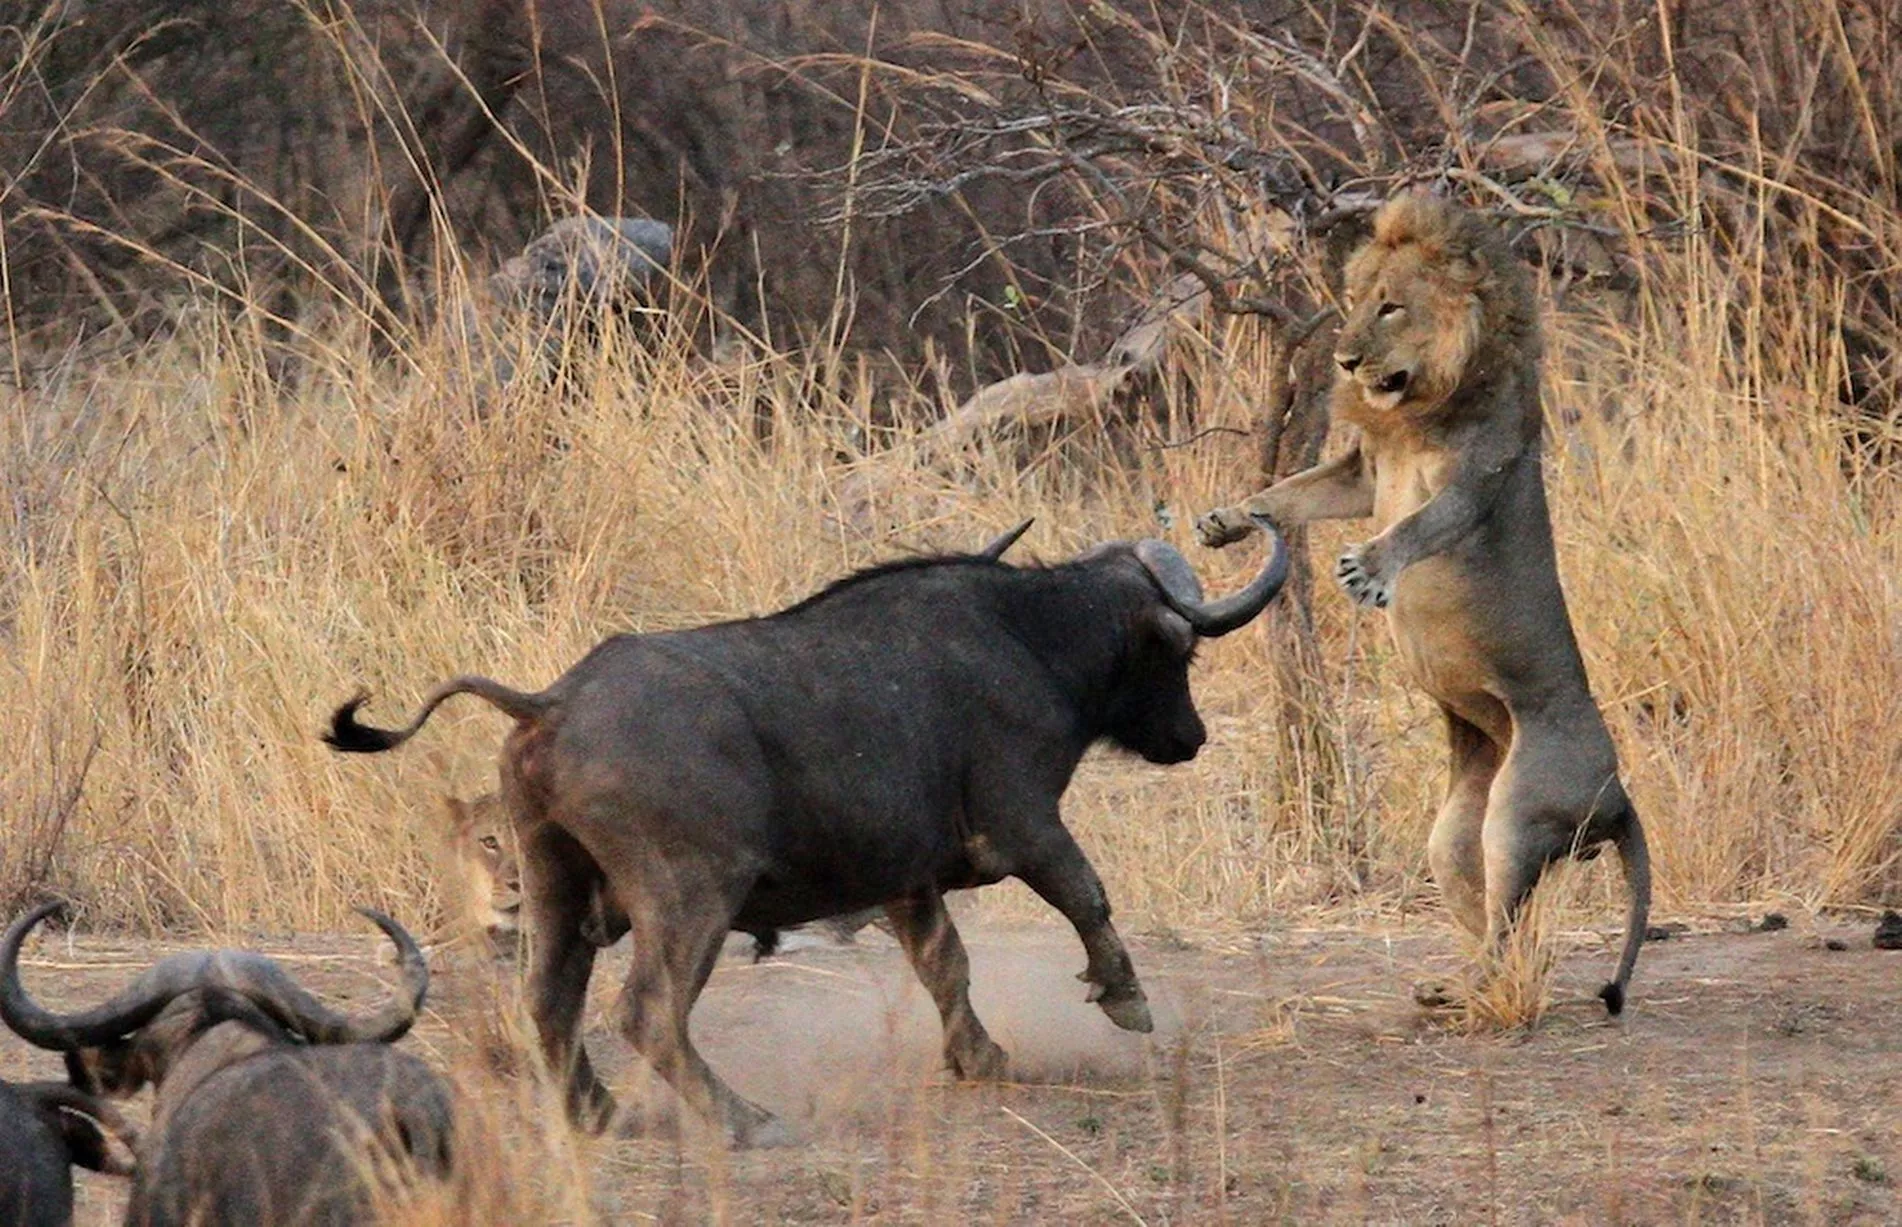 Lions vs. Buffaloes, Predators and Prey Face Off in the wild